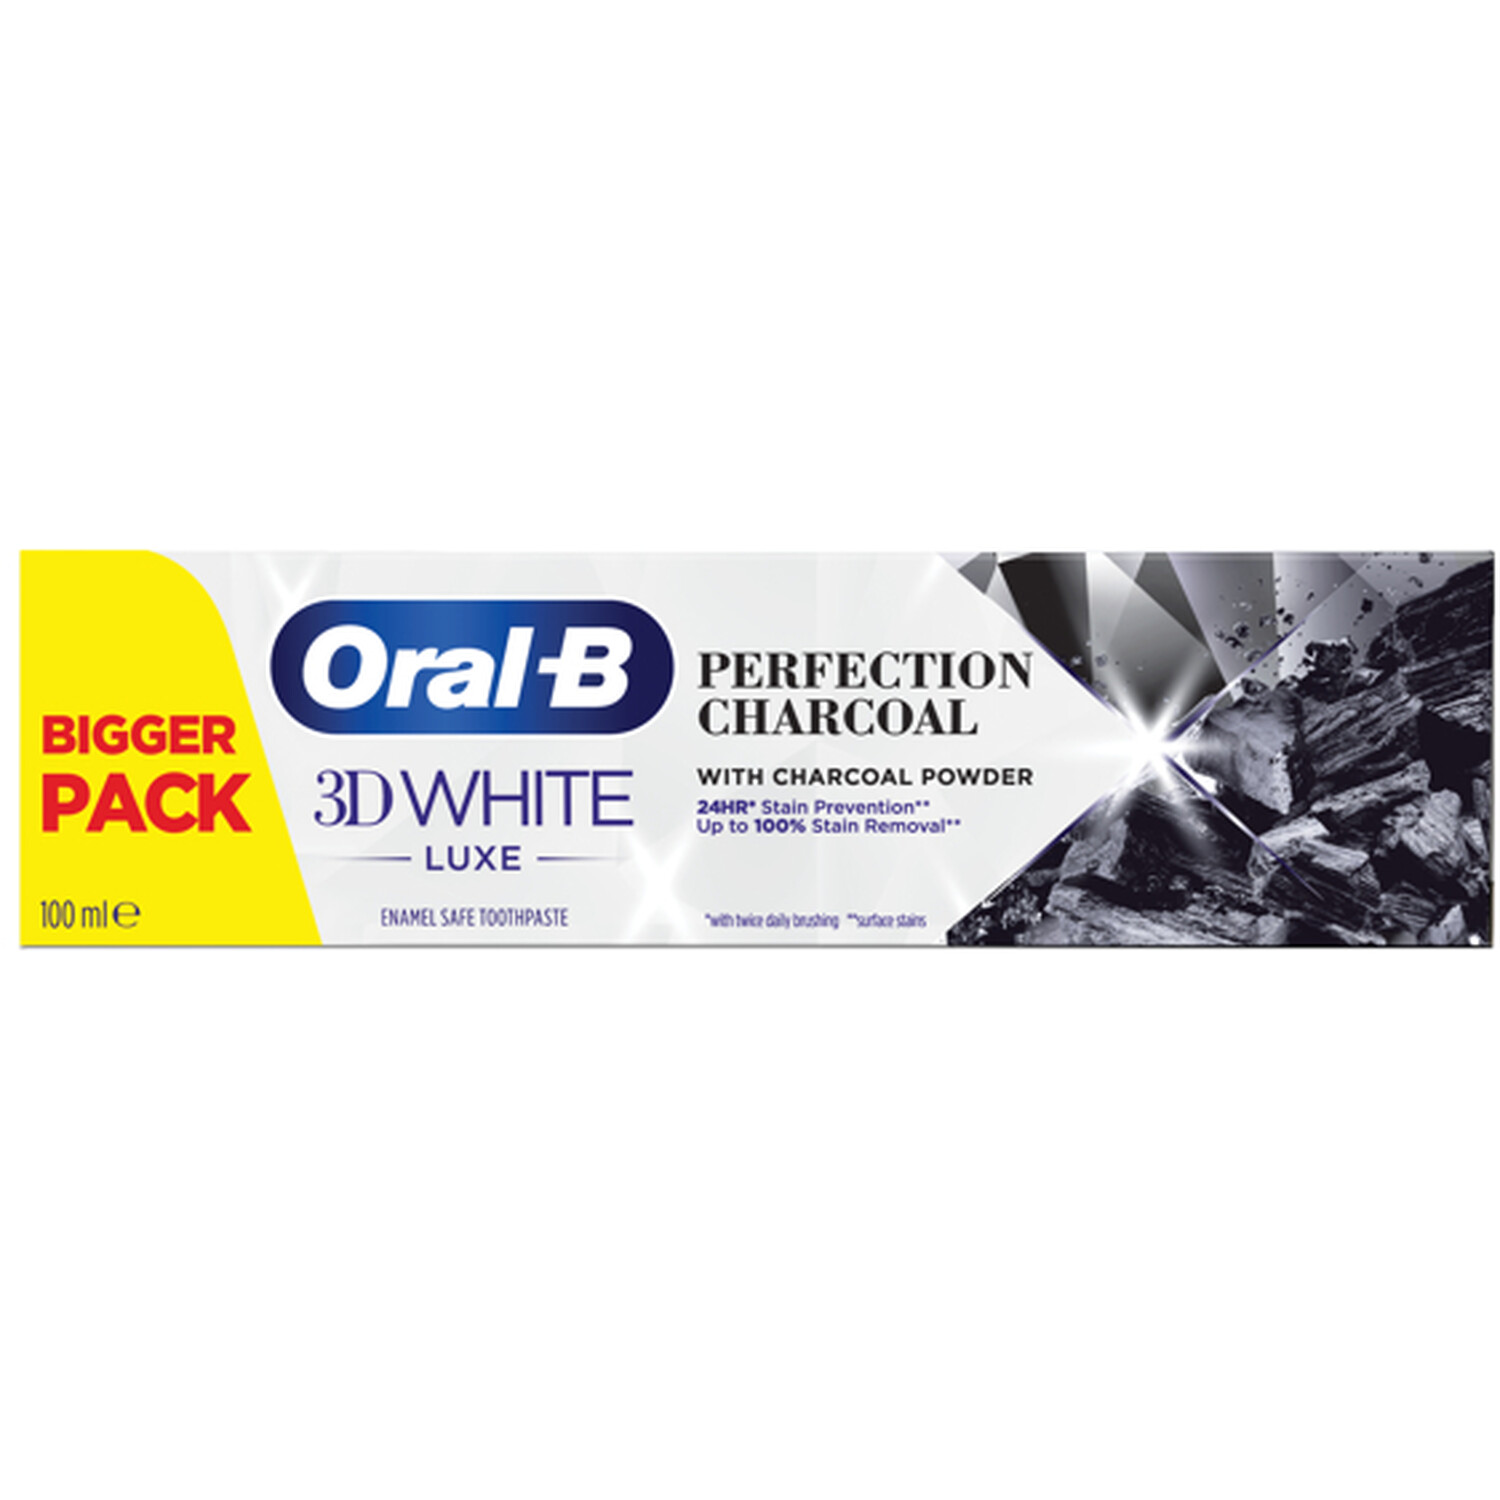 Oral-B 3D White Perfectional Charcoal Toothpaste 100ml Image 1